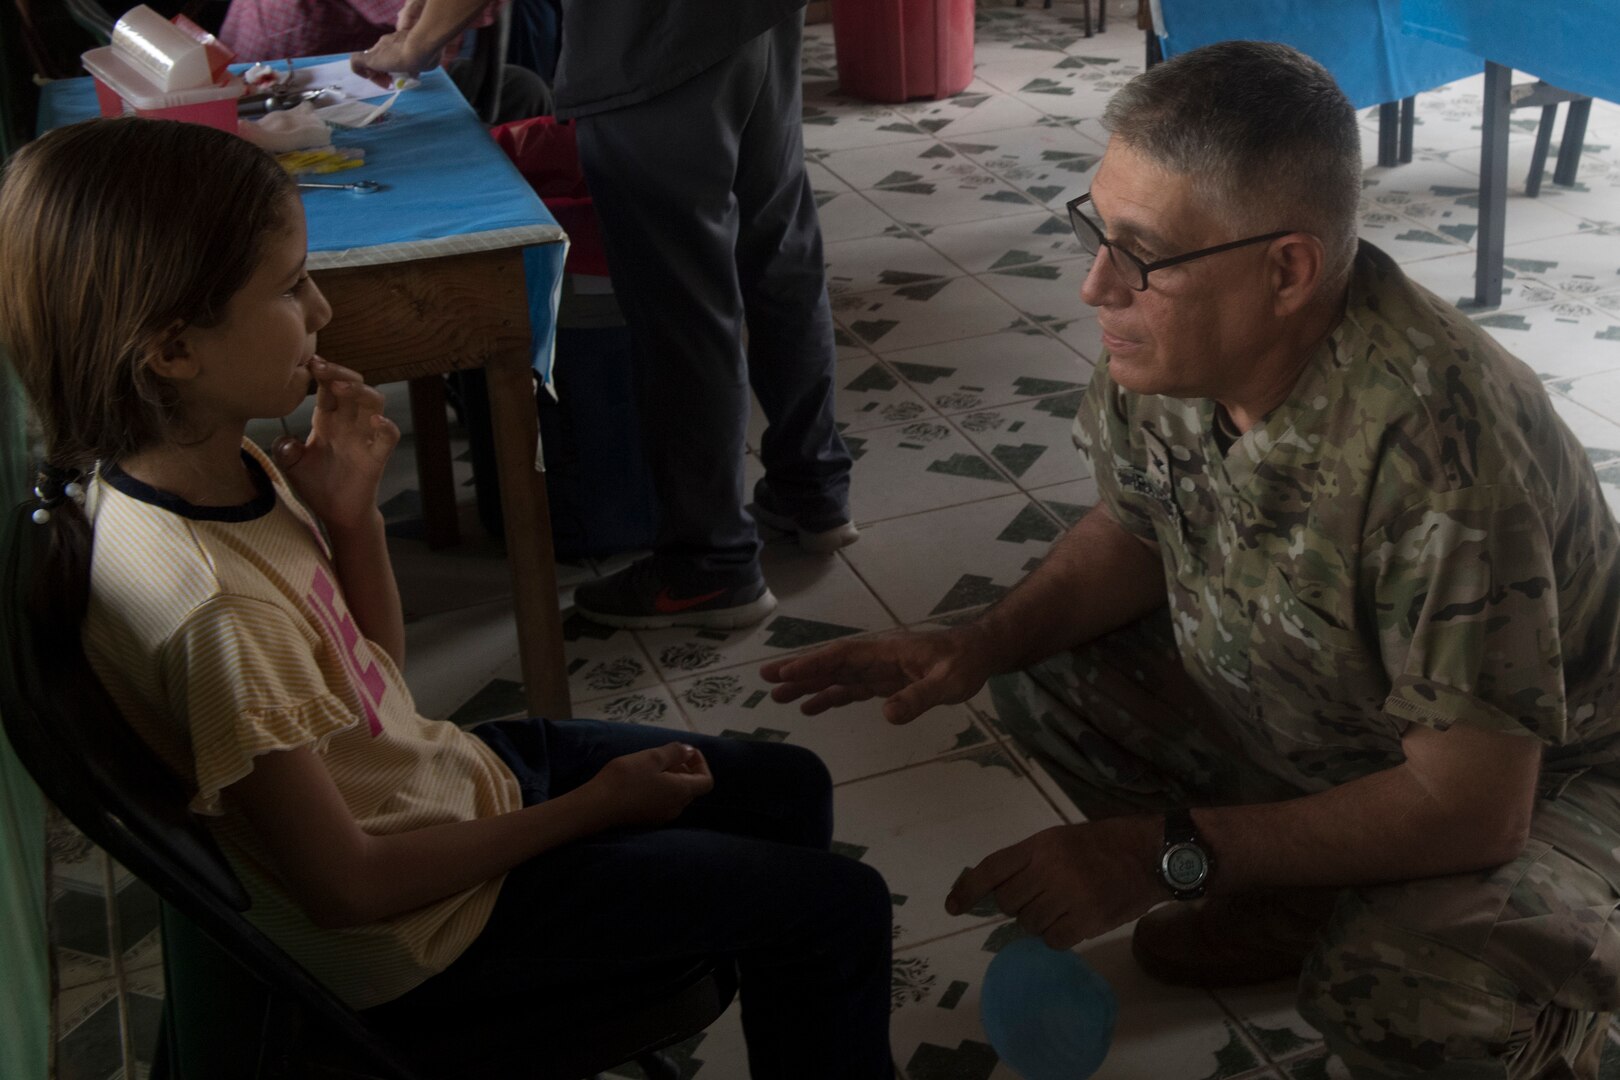 U.S. Army Col. Manuel Iravedra, Joint Task Force – Bravo Medical Element dentist, consoles a young child during a dental examination as part of a Medical Readiness Training Exercise (MEDRETE) May 10, 2019, in El Paraiso, Honduras. Members of JTF-B partnered with the Honduran Military and Ministry of Health to provide health care services for more than 1,300 Honduran citizens; reaching a third of the citizens in the towns of Argelia, Santa Maria and Las Dificultades in the El Paraiso Department. The goal of the mission was to provide the medical staff training in their areas of expertise as well as strengthen partnerships with the Honduran allies. (U.S. Air Force photo by Staff Sgt. Eric Summers Jr.)